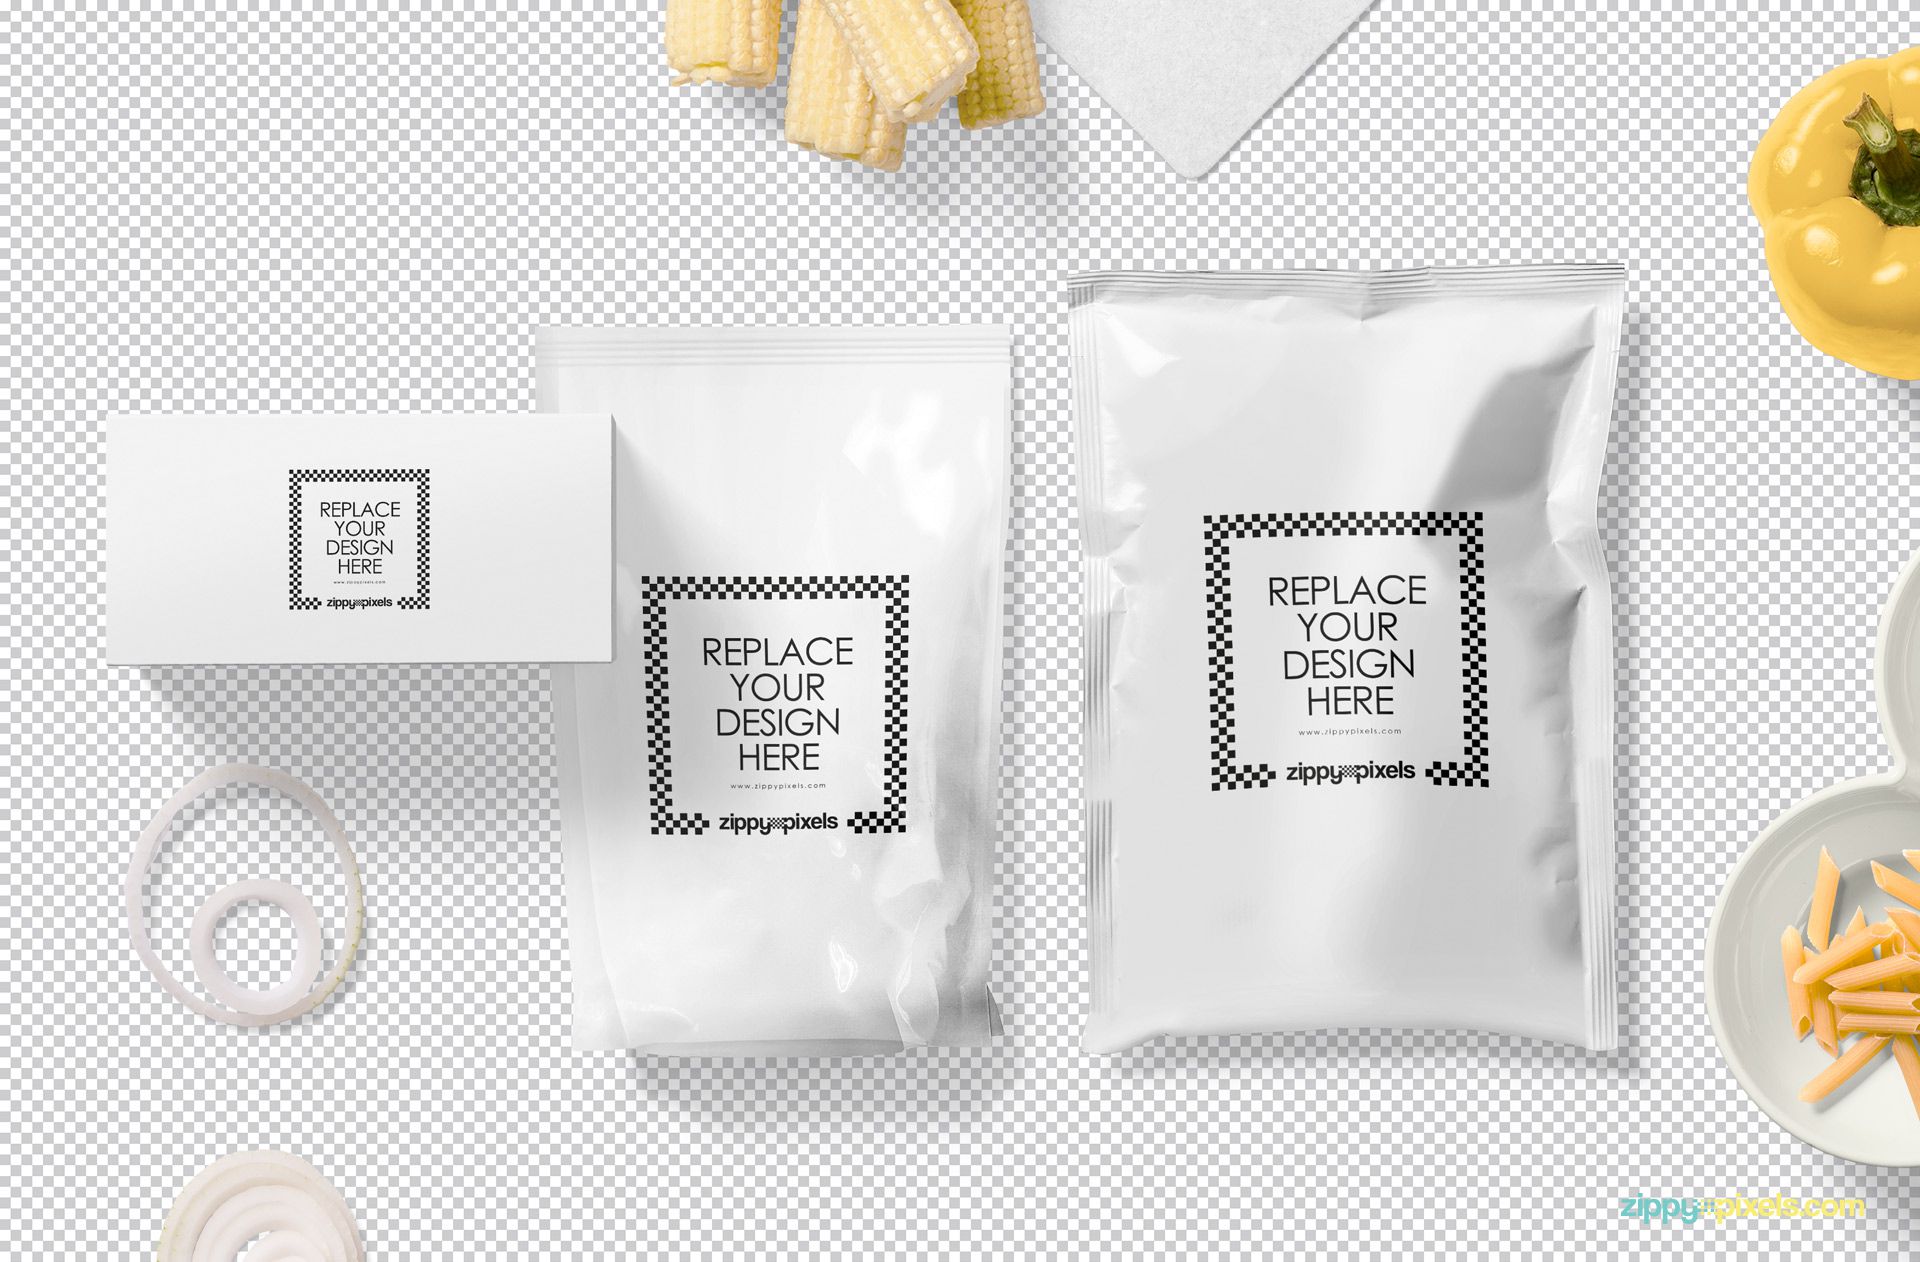 Plain packaging items placed on greyscale background.